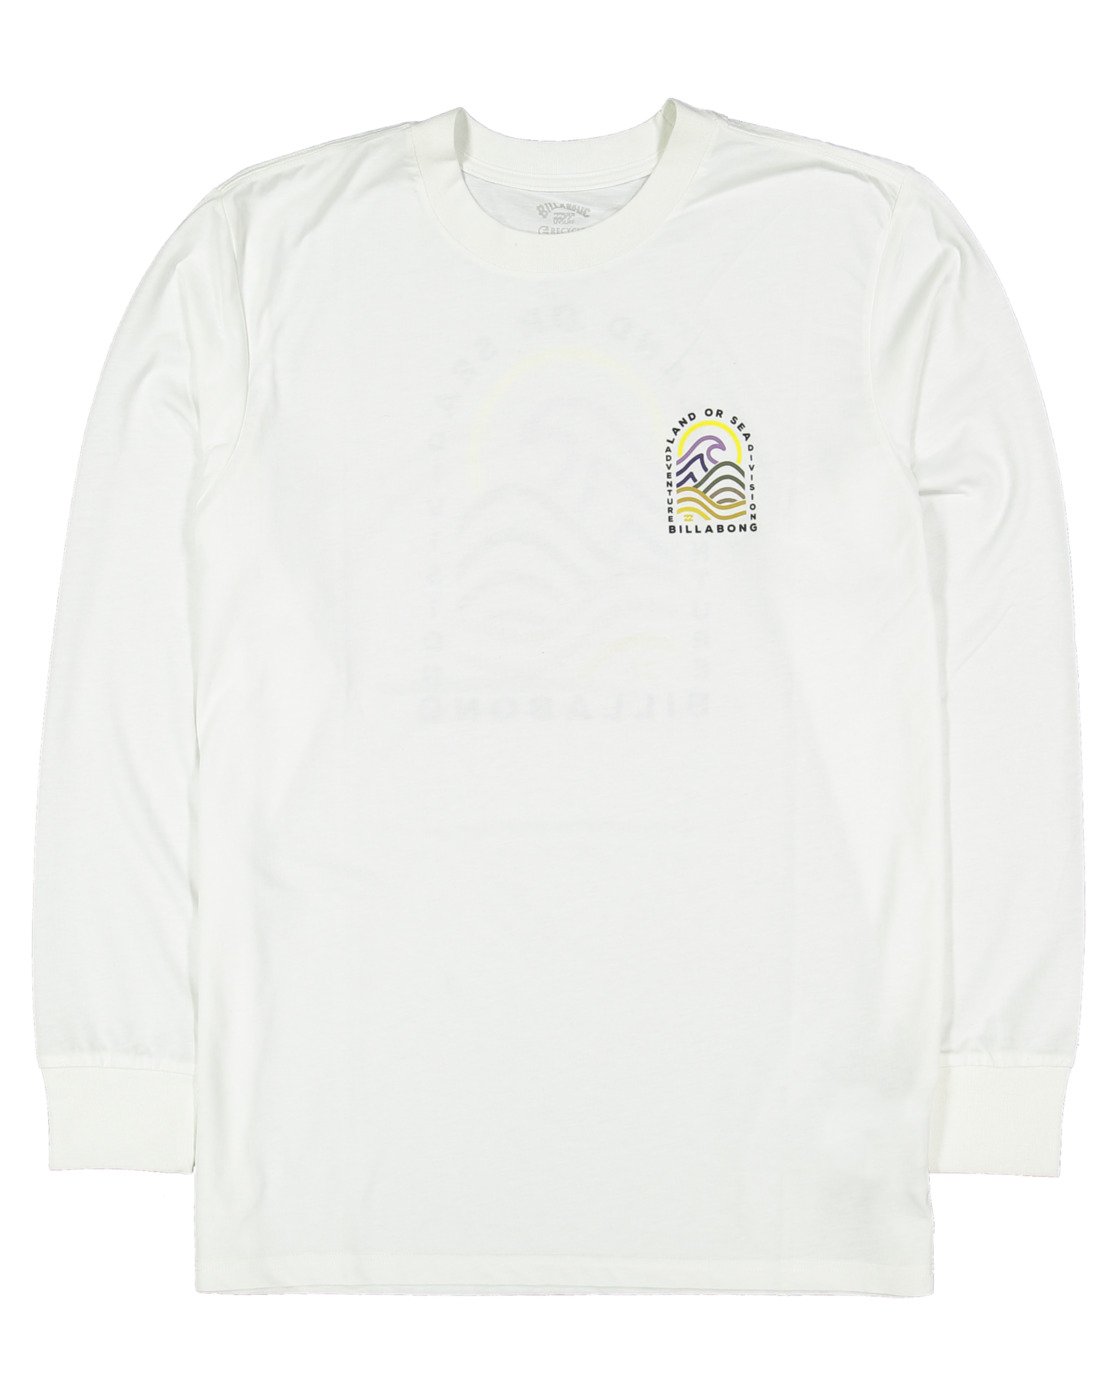 Billabong Adventure Division Transition Long Sleeve Tee Off white